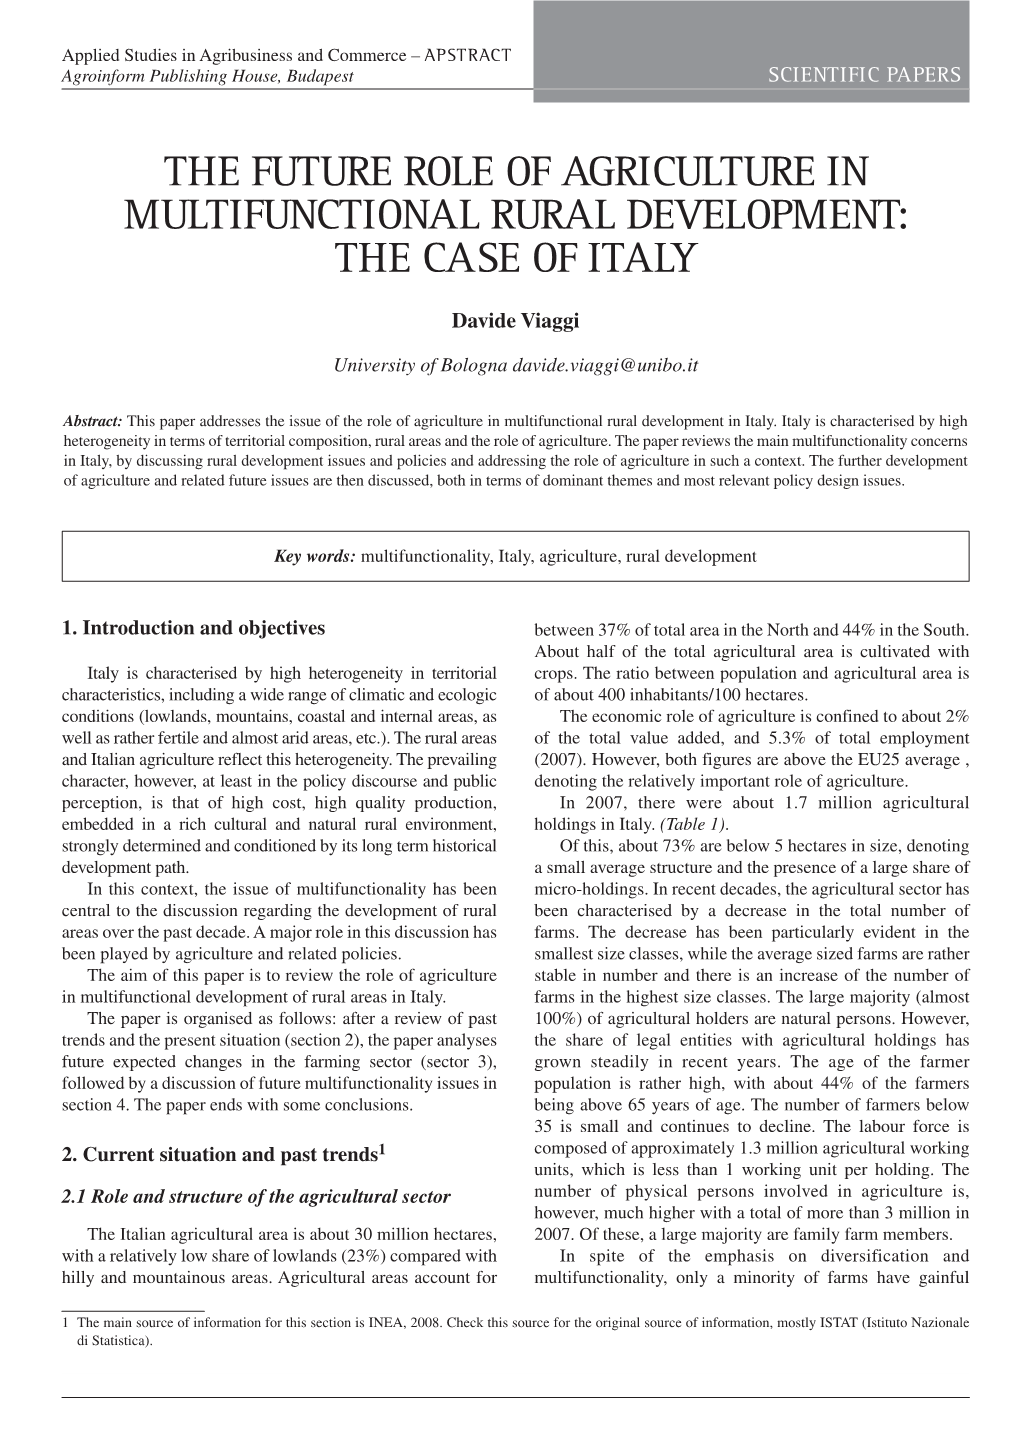 The Future Role of Agriculture in Multifunctional Rural Development: the Case of Italy